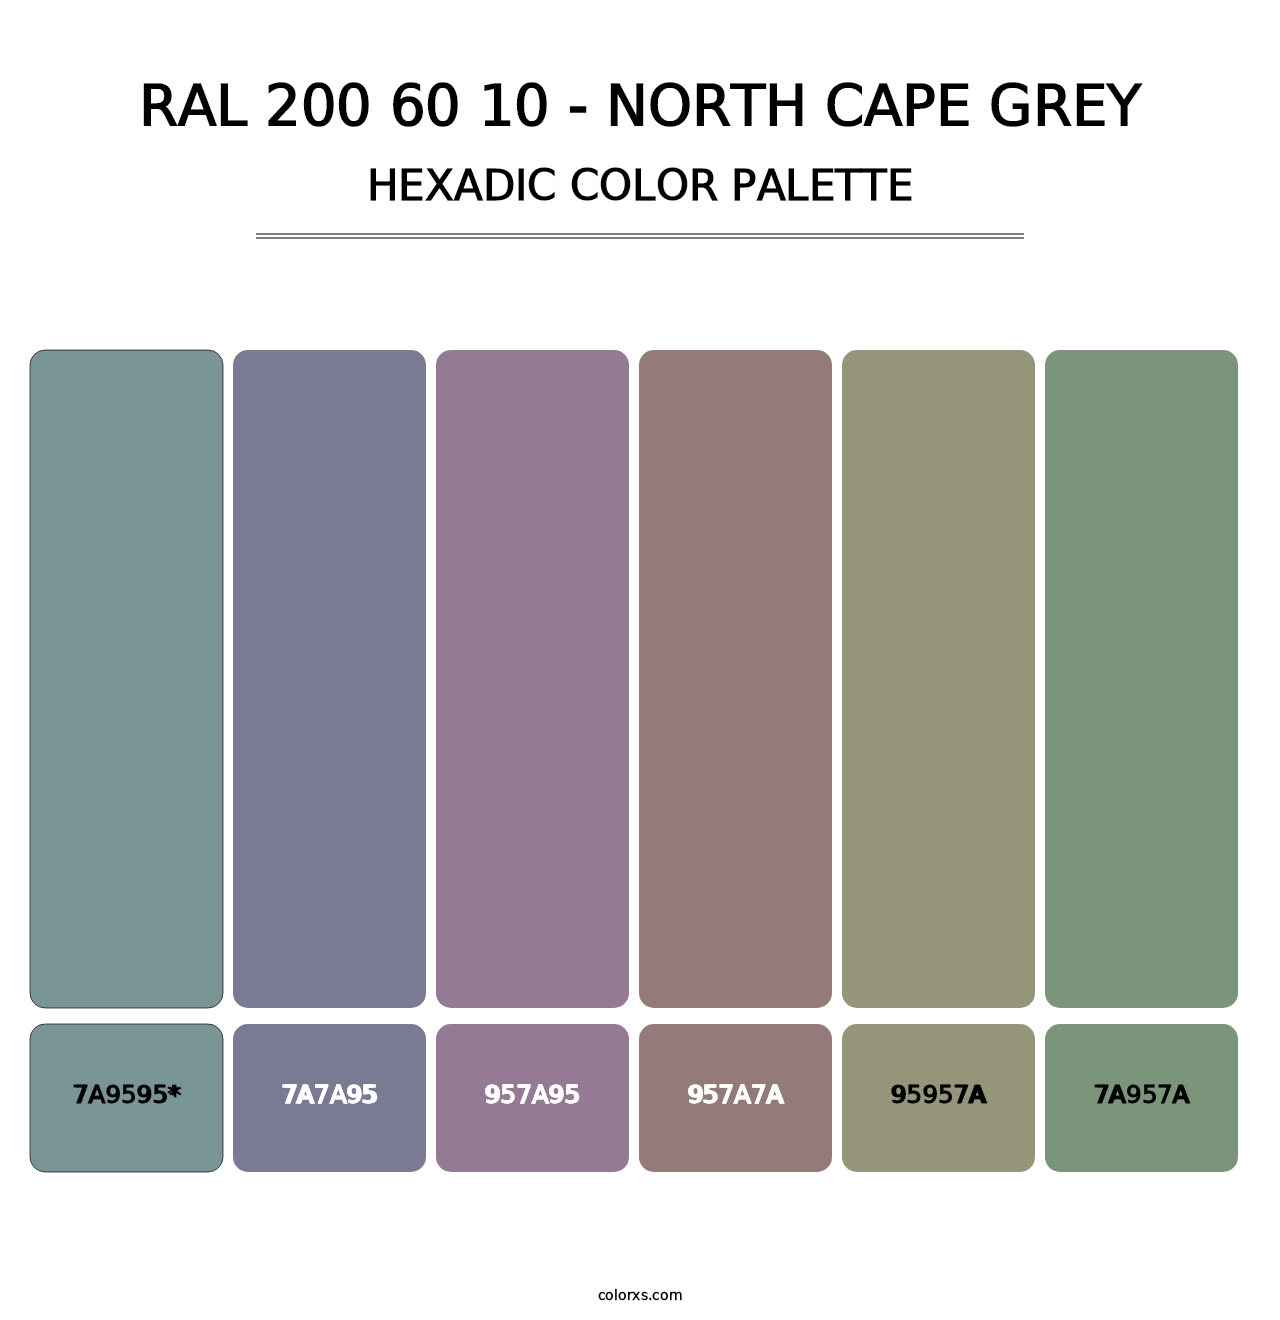 RAL 200 60 10 - North Cape Grey - Hexadic Color Palette